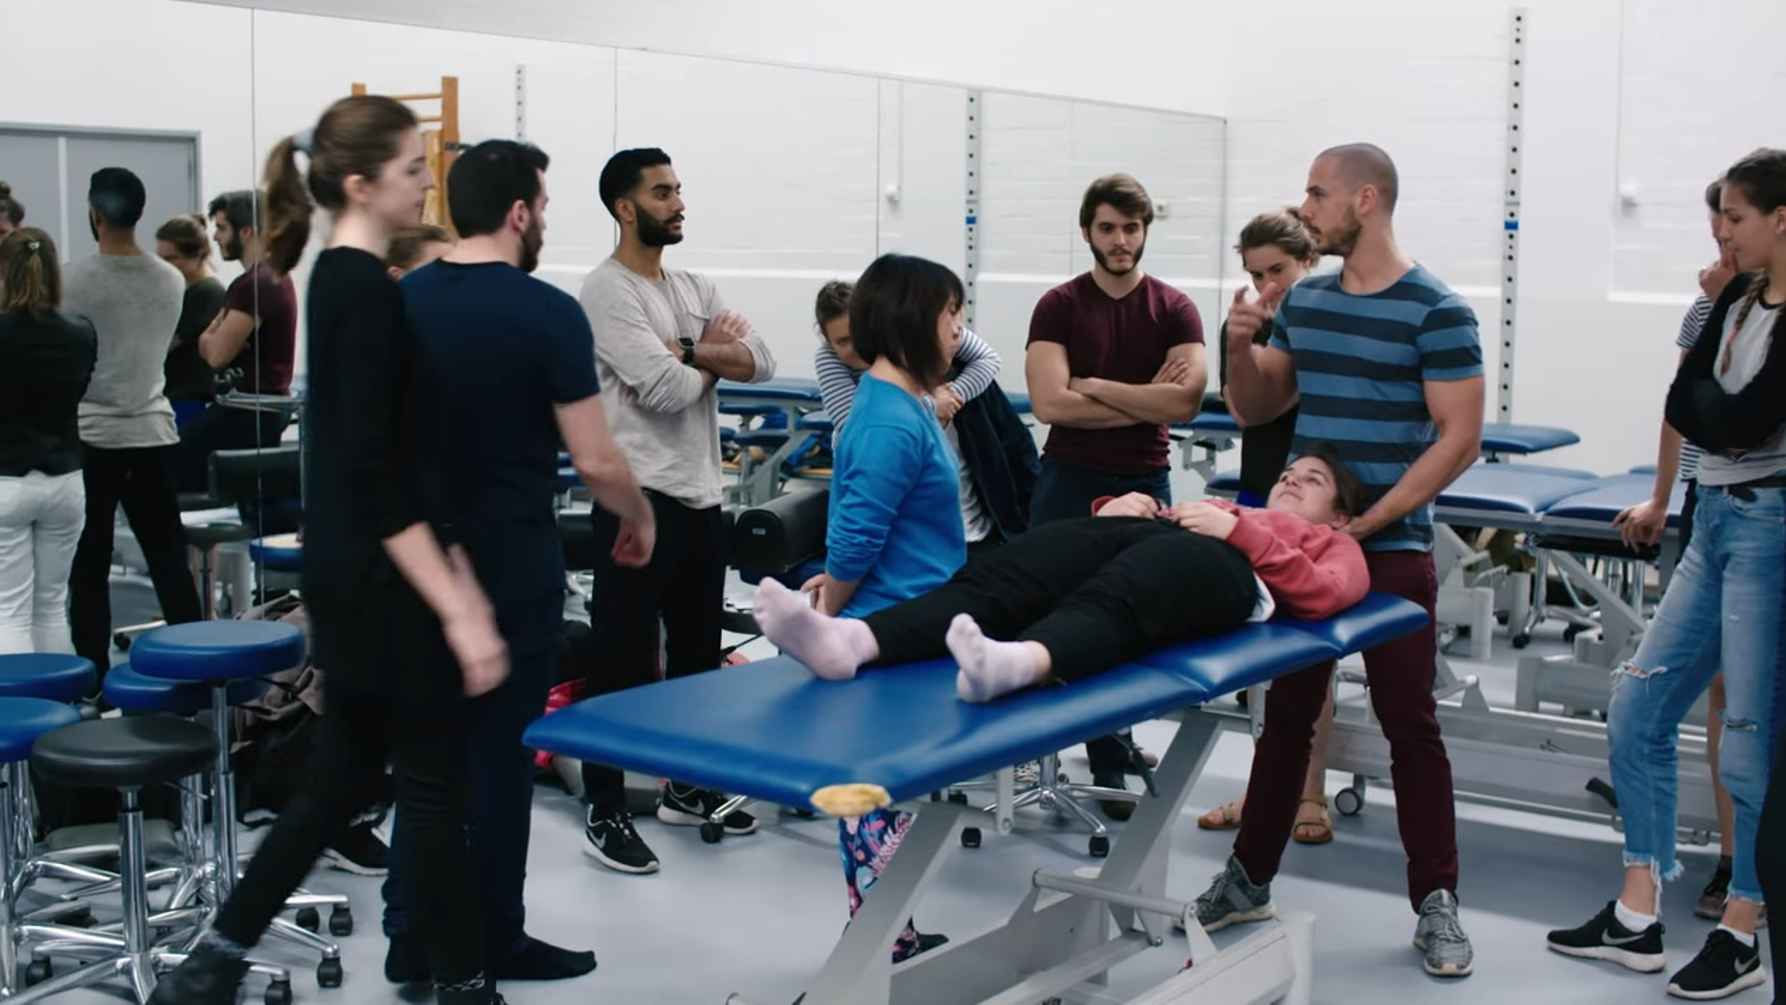 Find out what it's like to study at the European School of Physiotherapy, a faculty of Amsterdam University of Applied Sciences